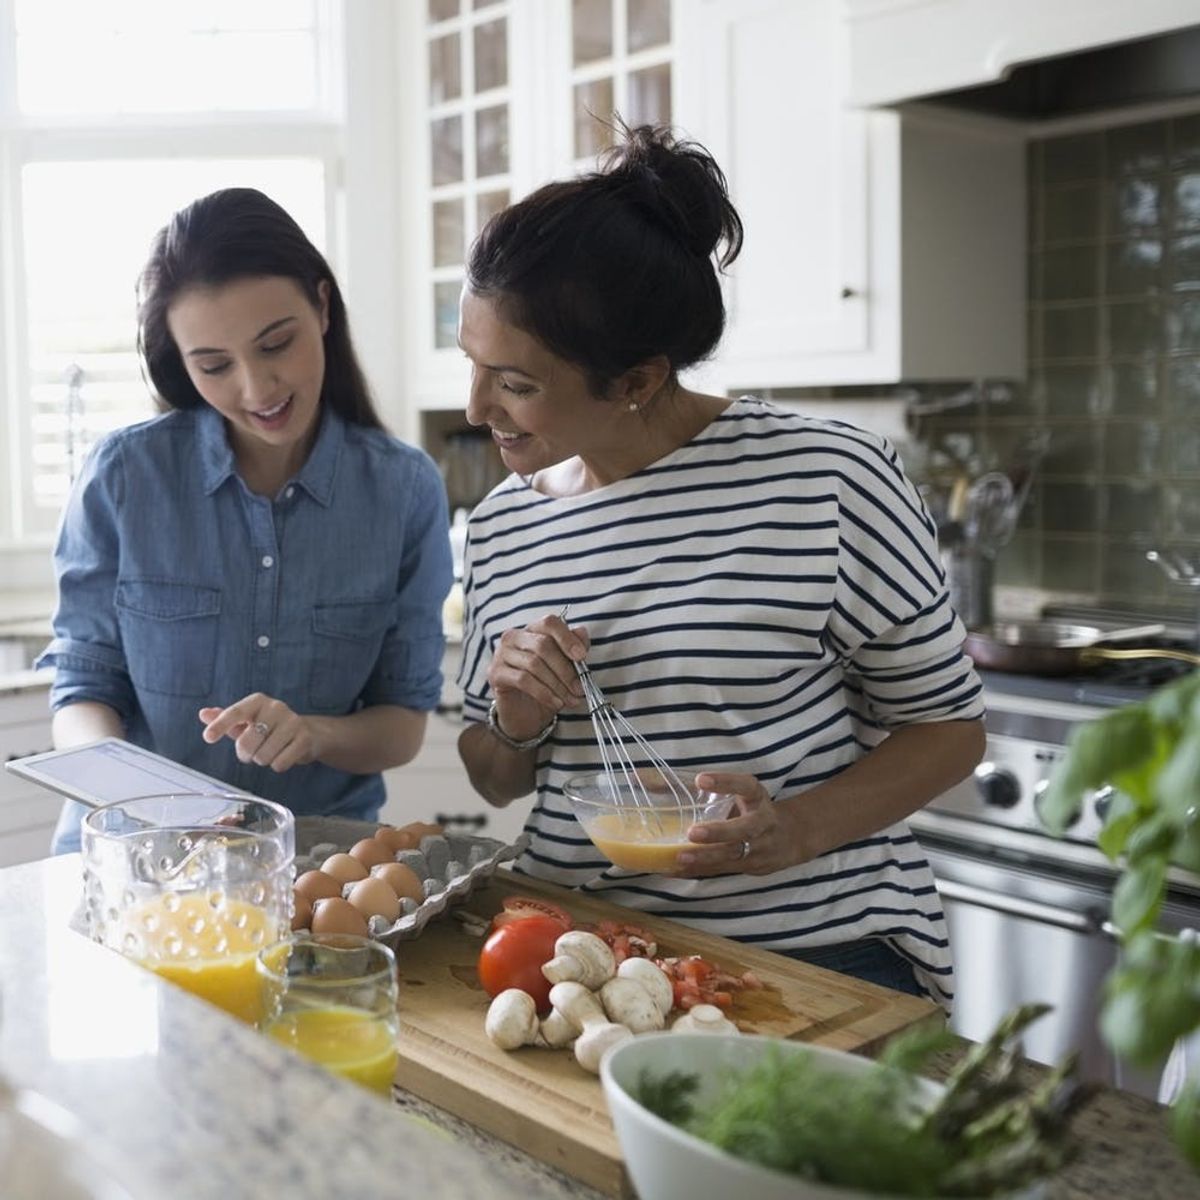 6 Expert Healthy Meal-Planning Tips for Cooking Beginners